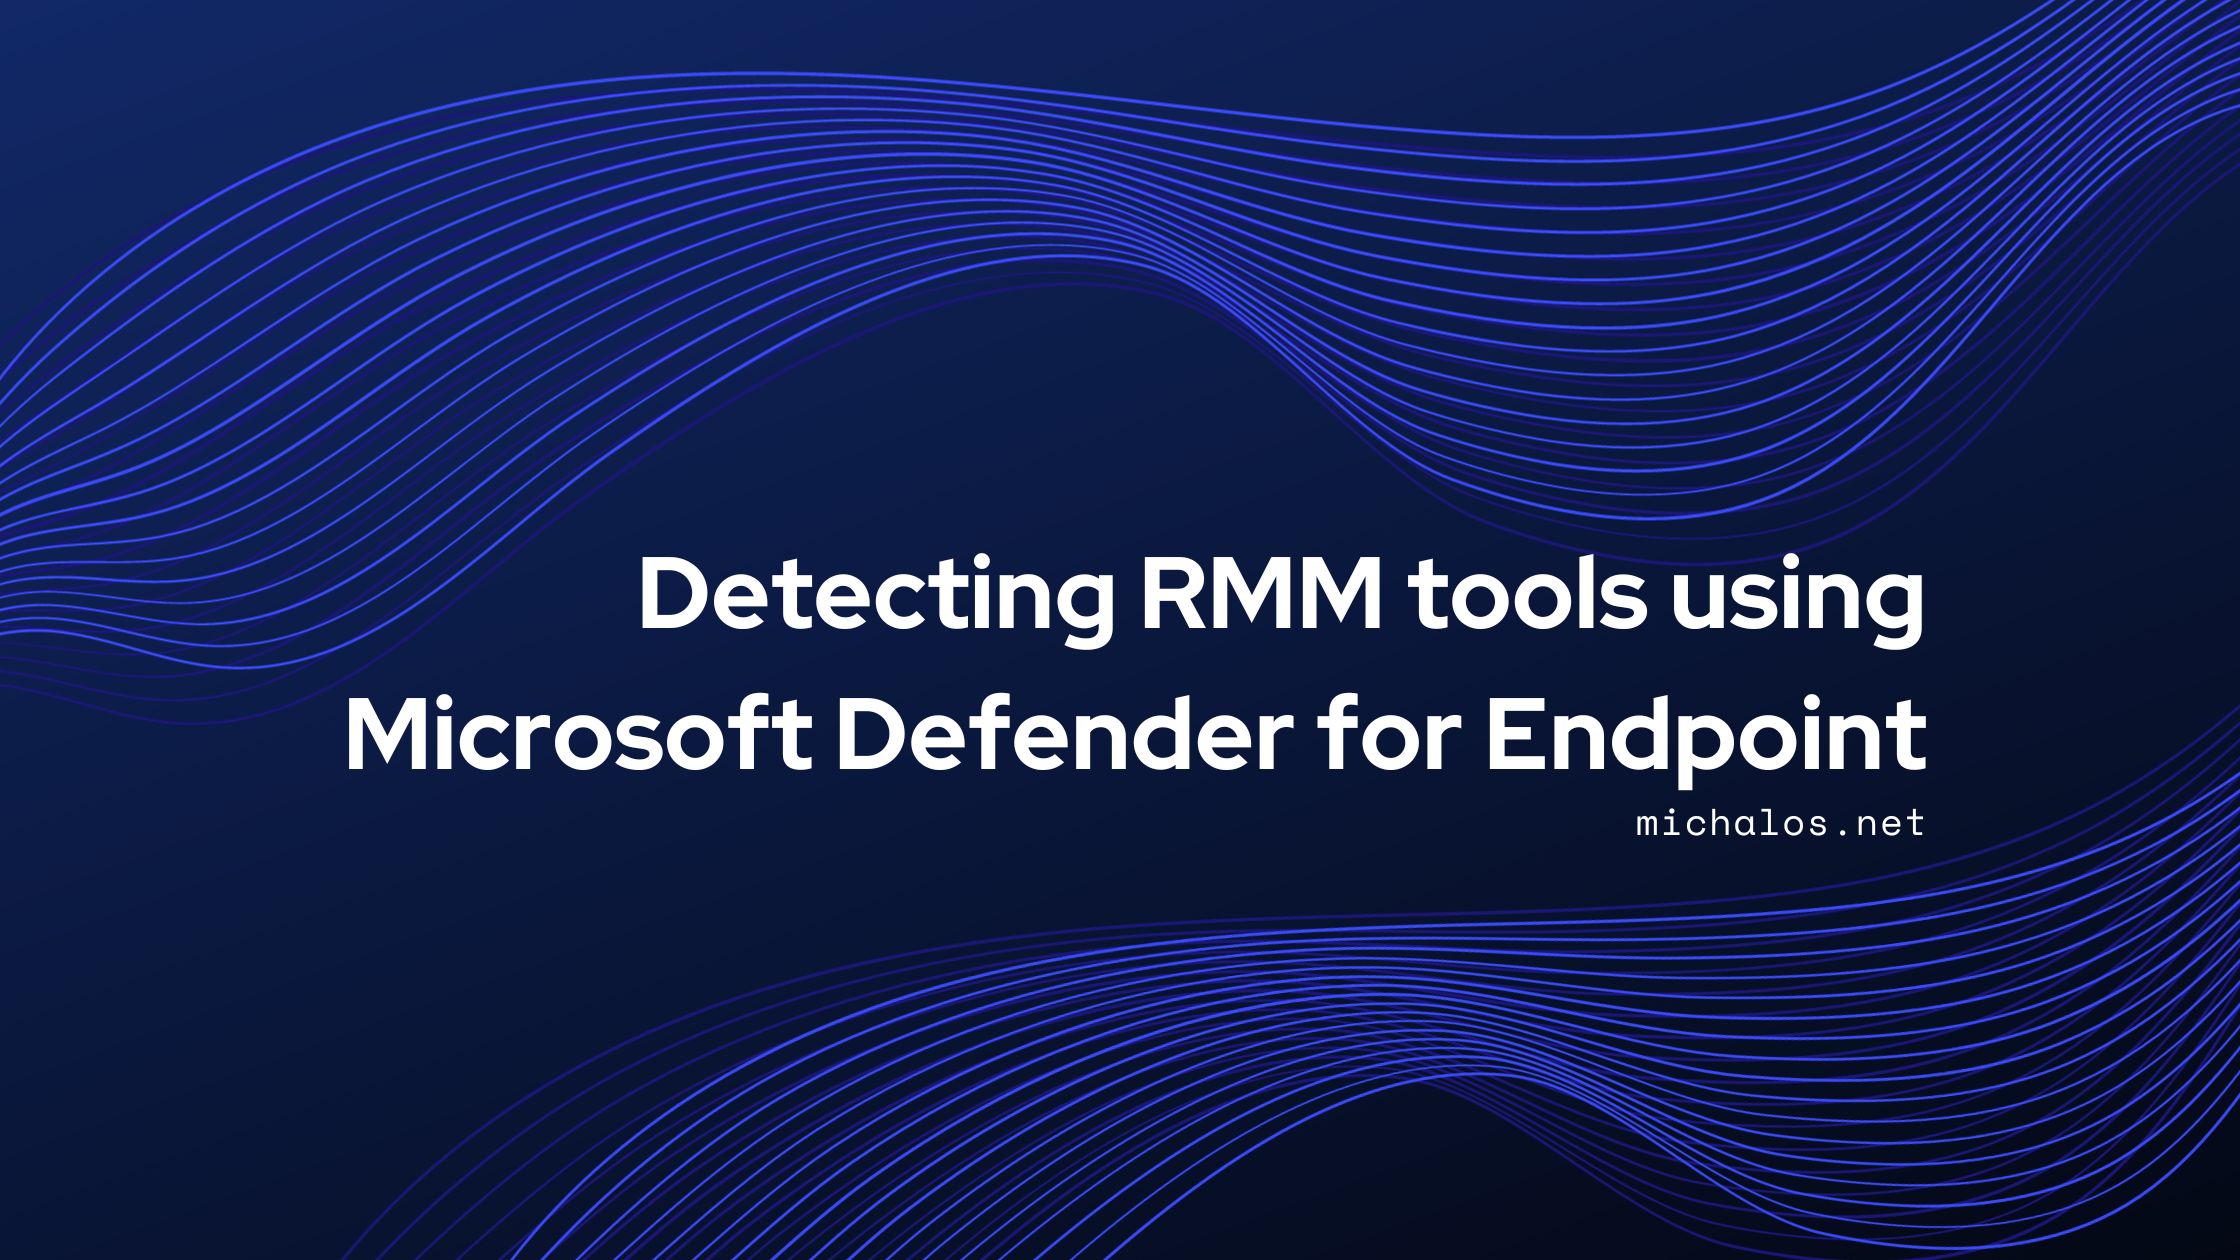 Detecting RMM tools using Microsoft Defender for Endpoint